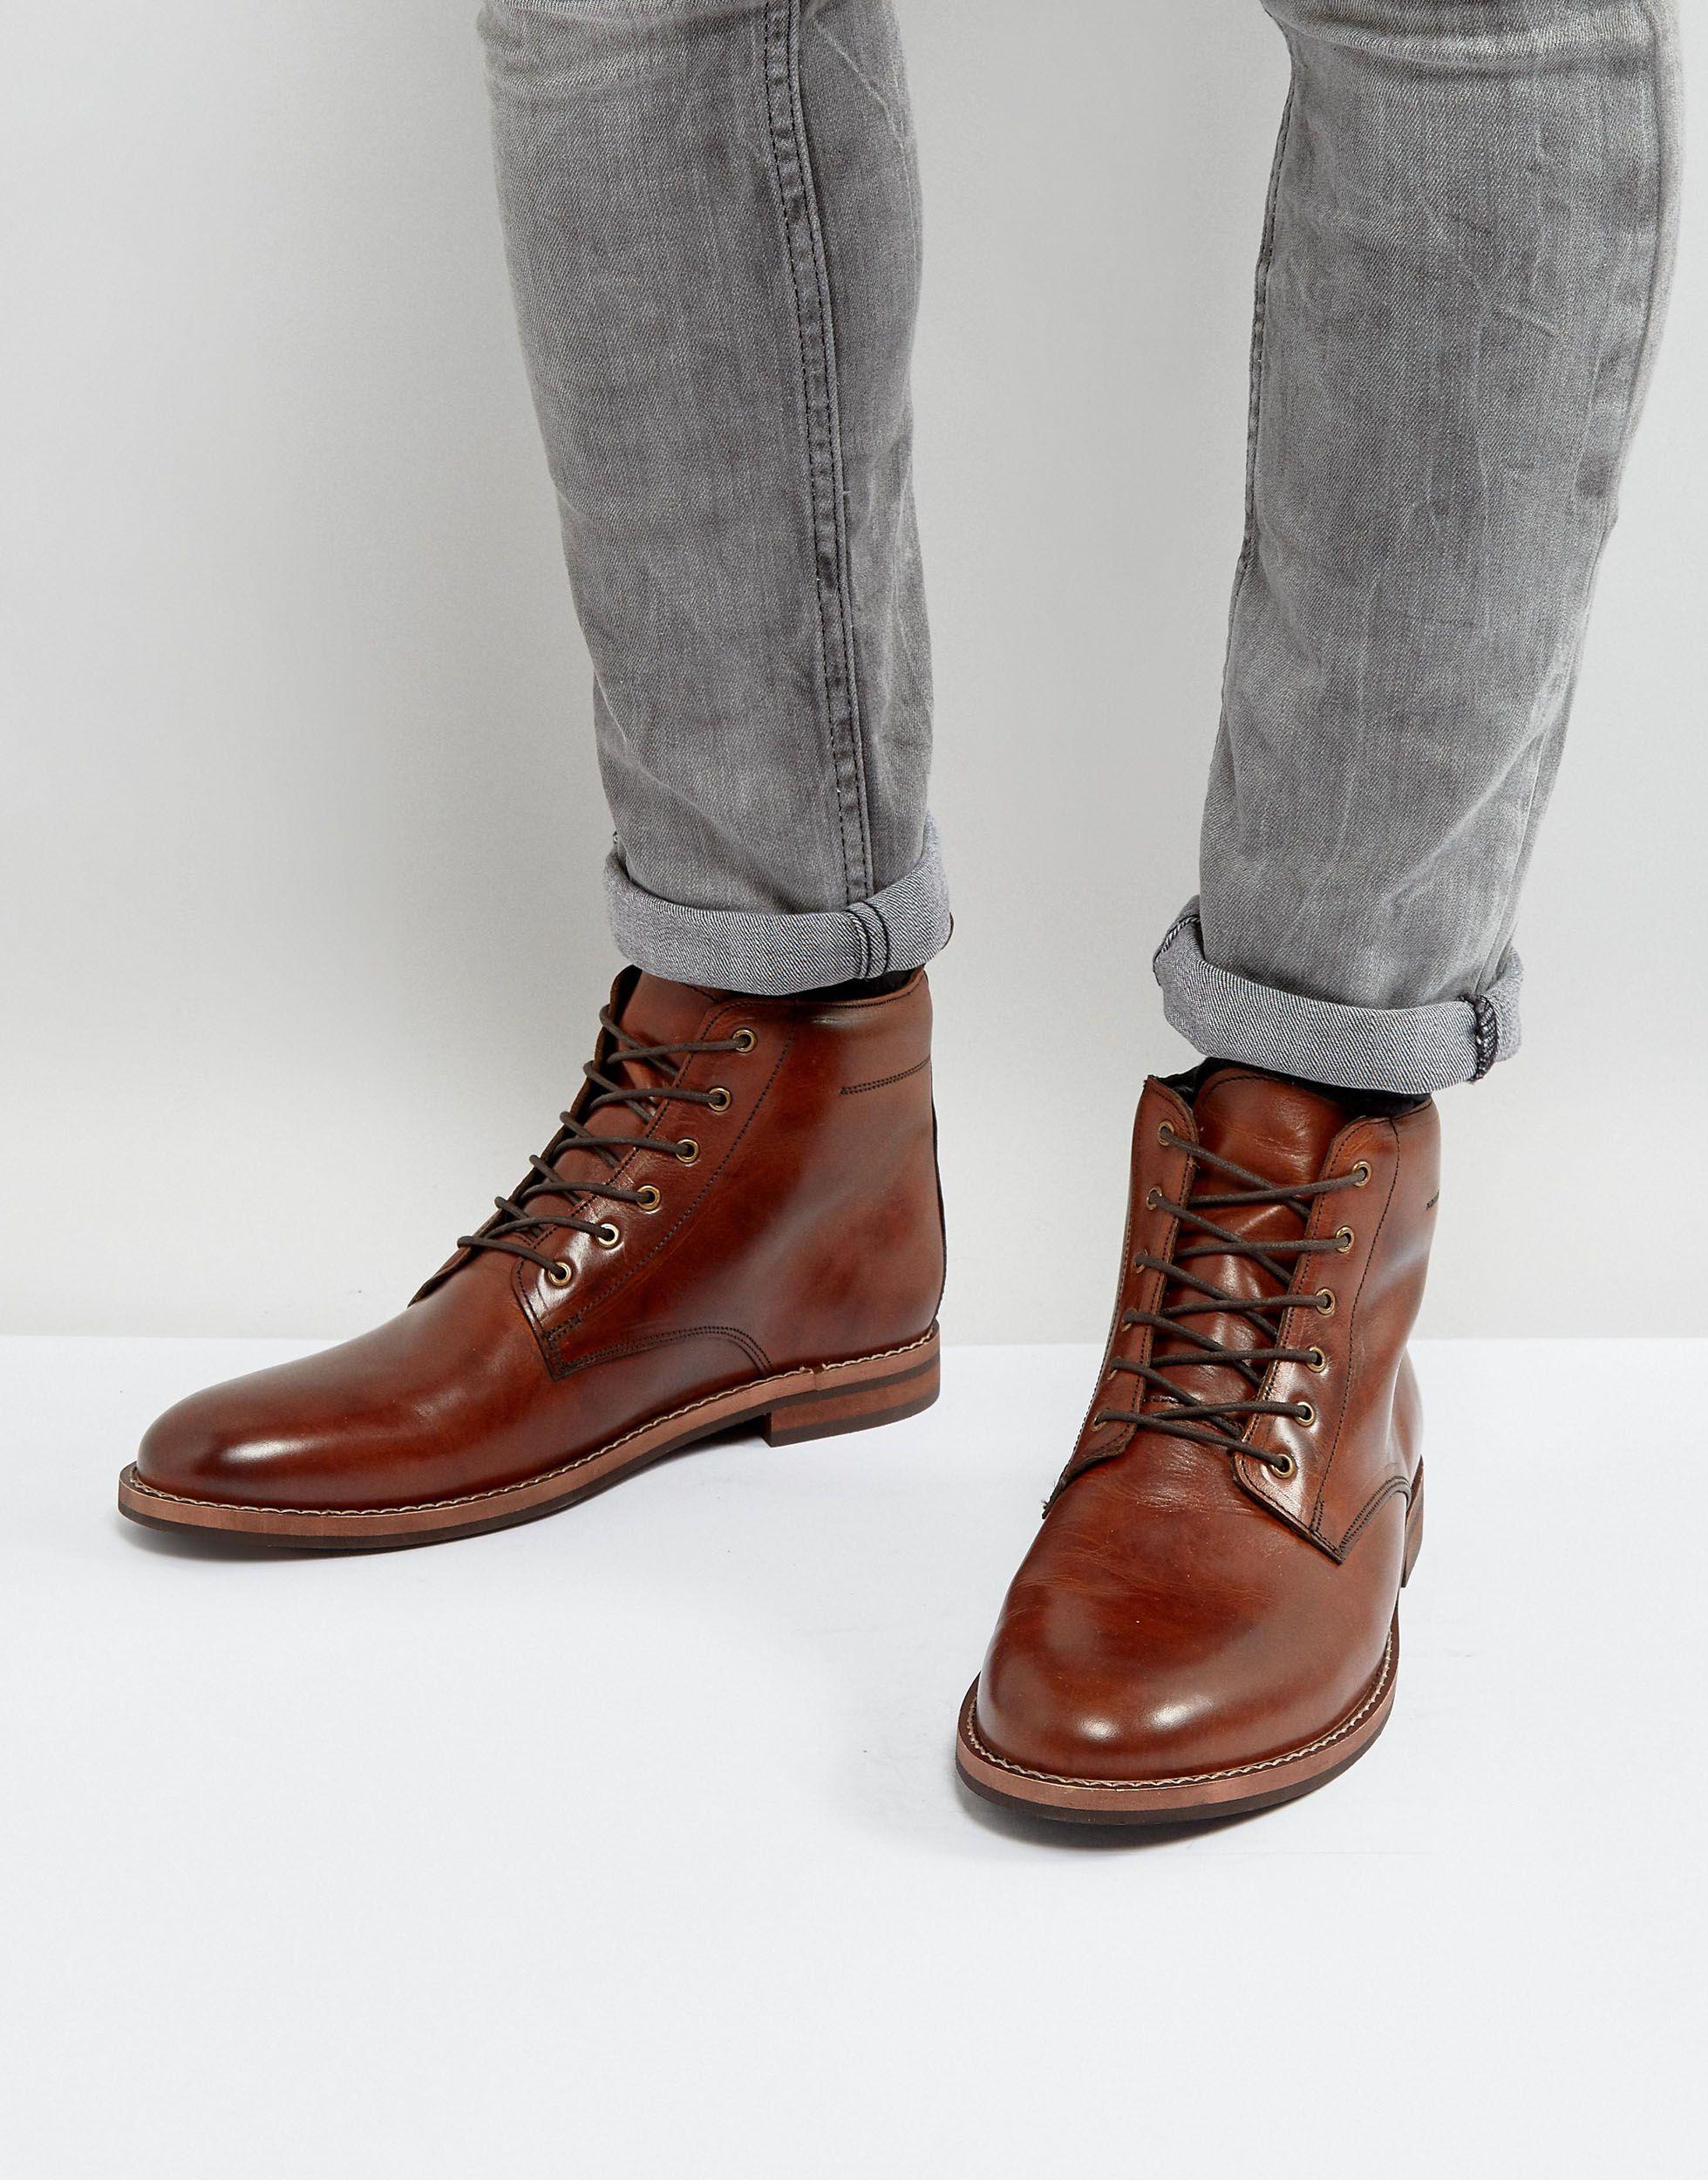 Dune Leather Lace Up Boots in Brown for Men - Lyst